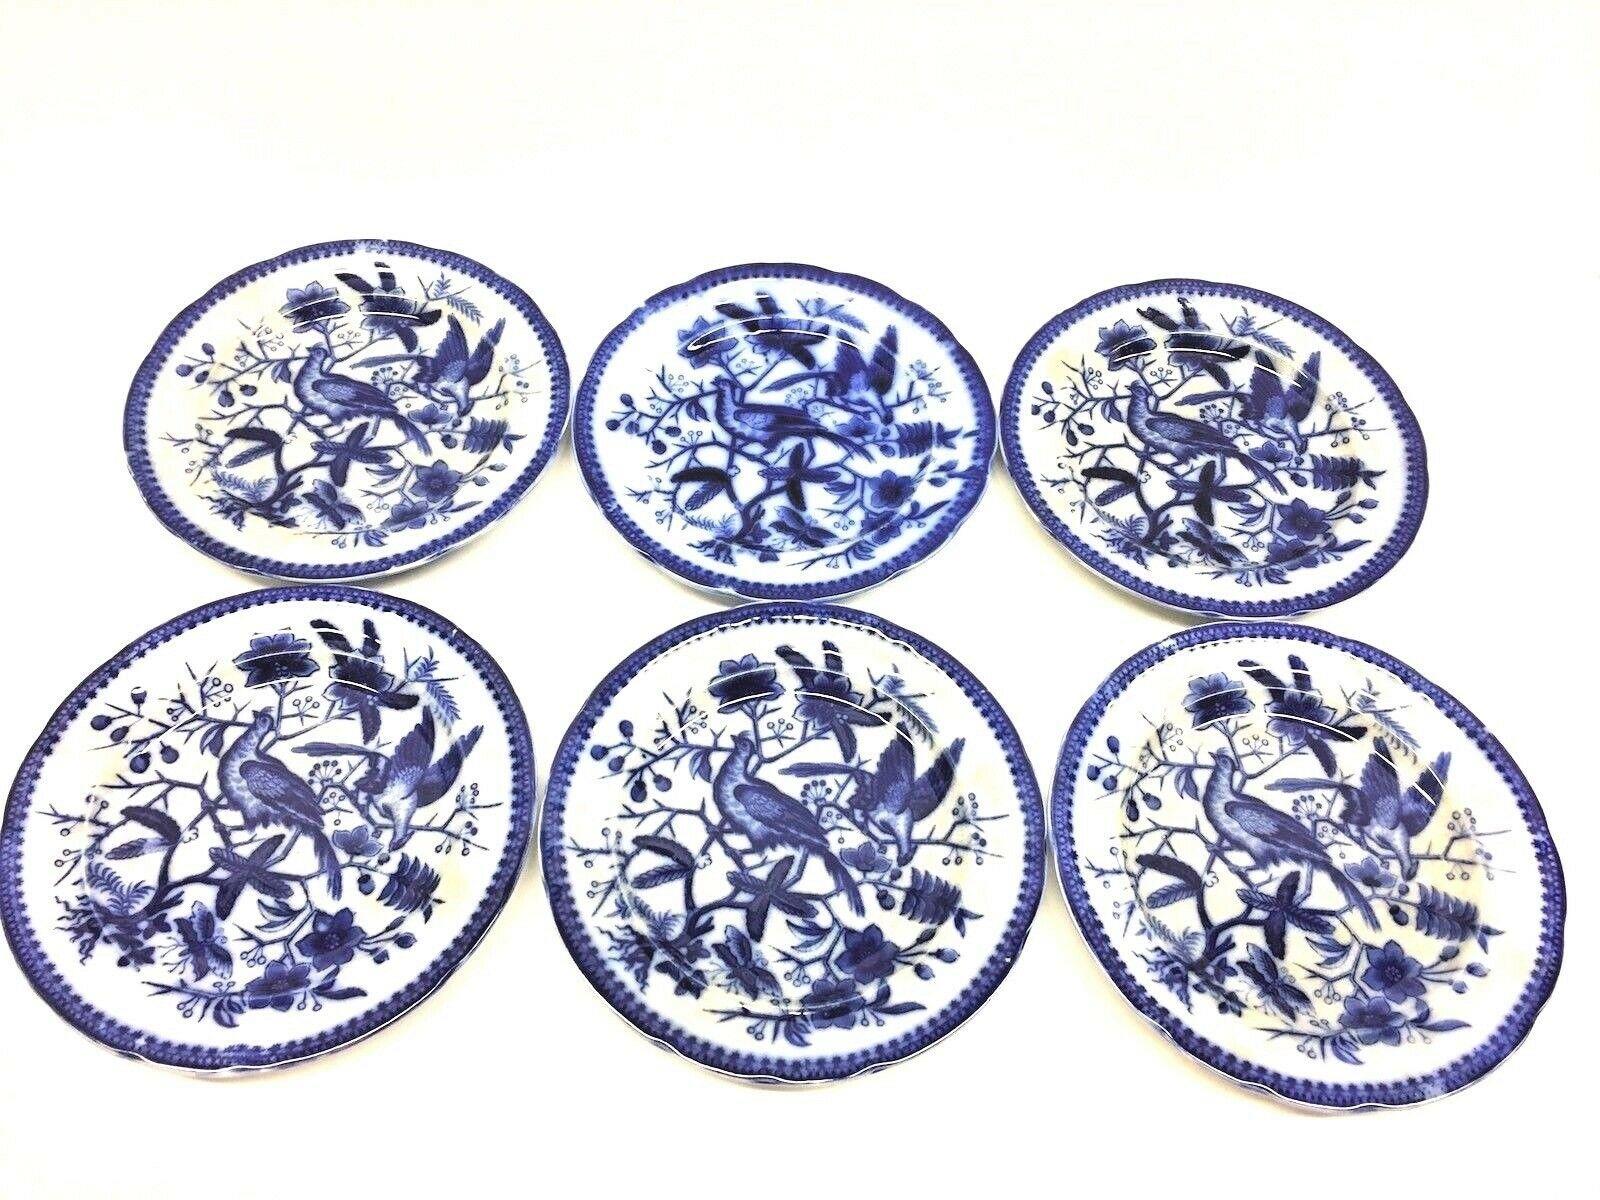 19th Century Flow Blue V&B Villeroy Boch Lot of 6 Plates Pheasant Series Decor In Good Condition For Sale In Nuernberg, DE